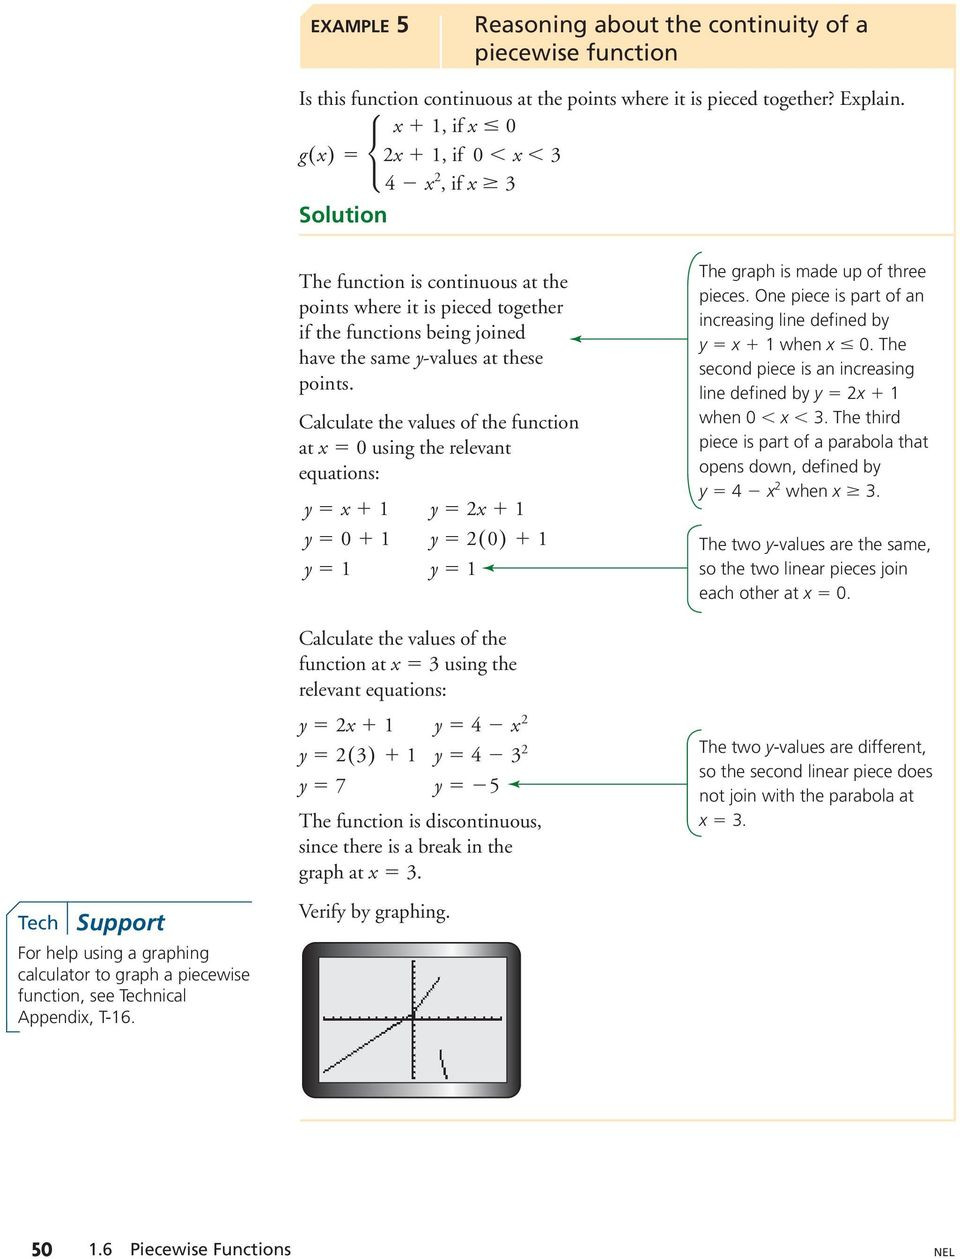 Worksheet Piecewise Functions Algebra 2 1 6 Piecewise Functions Learn About the Math Representing